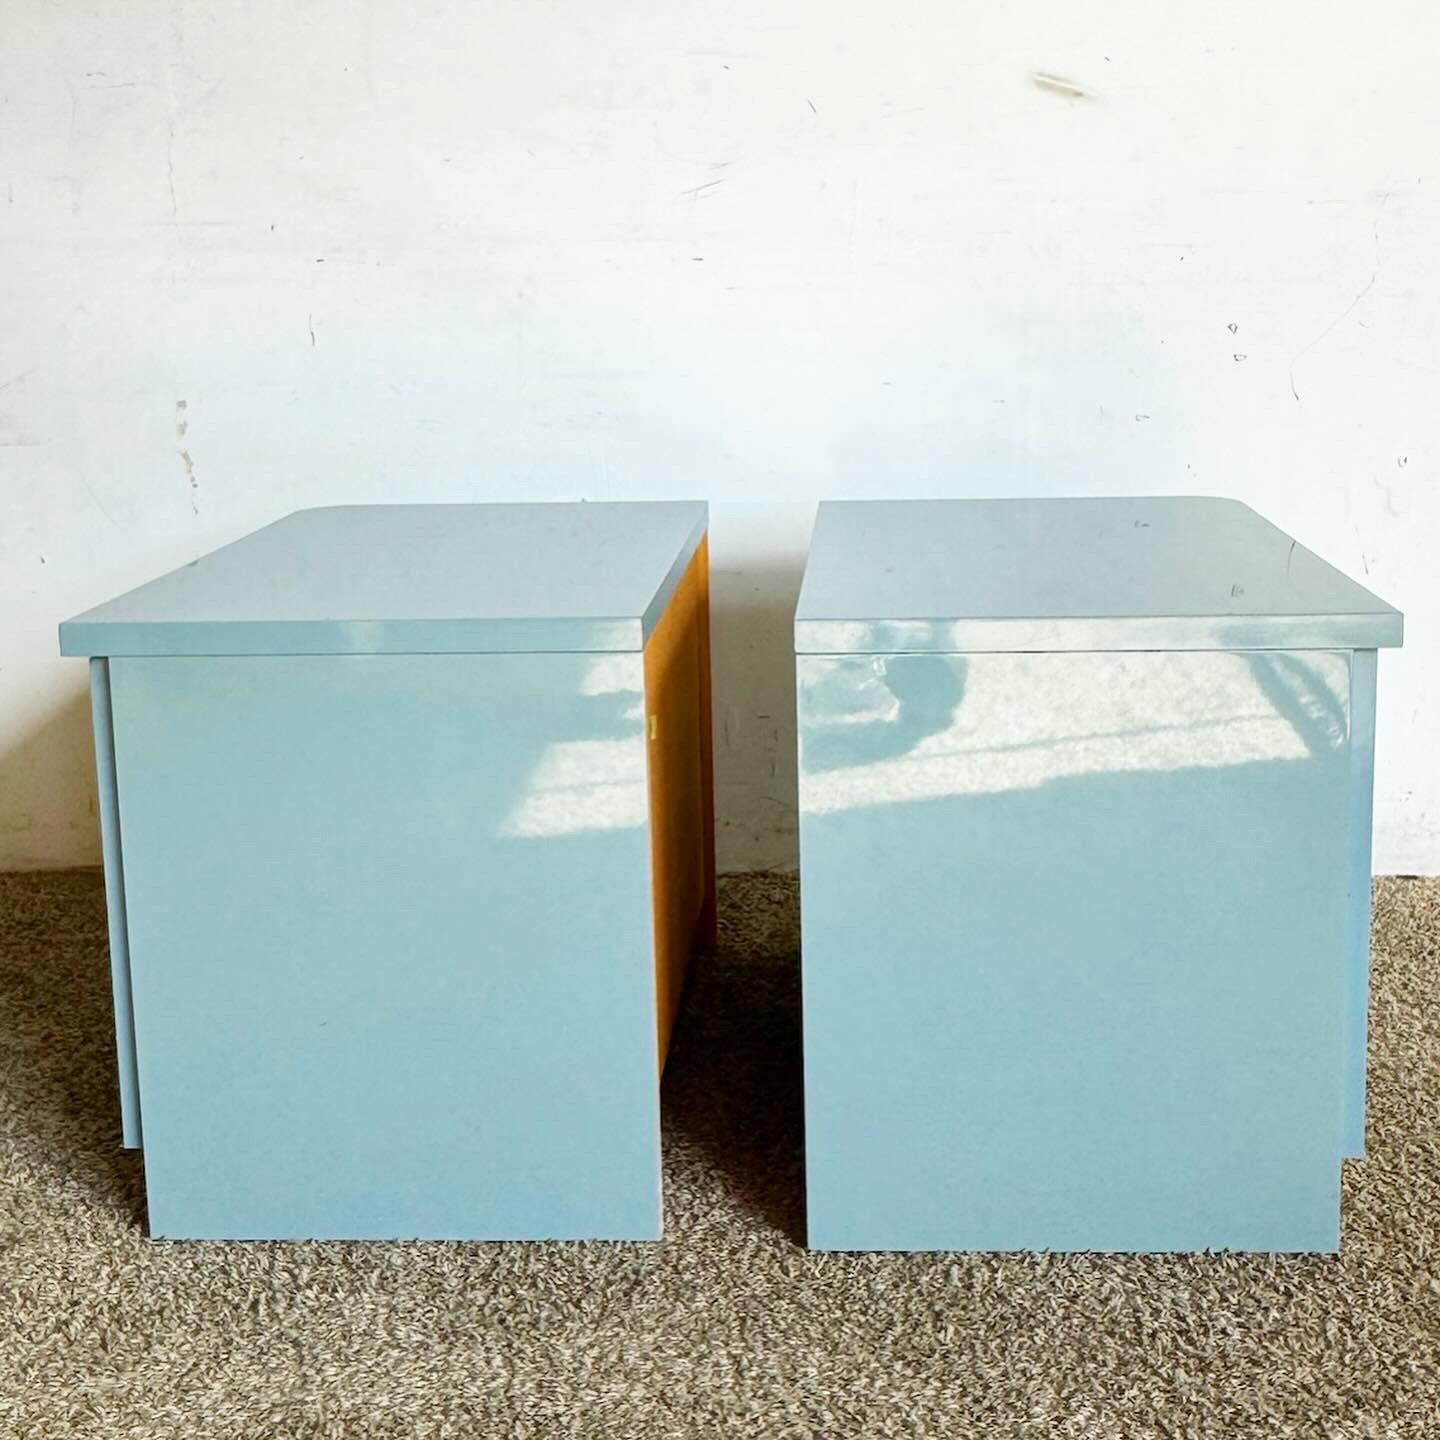 Italian Postmodern Baby Blue Lacquered Nightstands With Gold Accents – a Pair For Sale 2